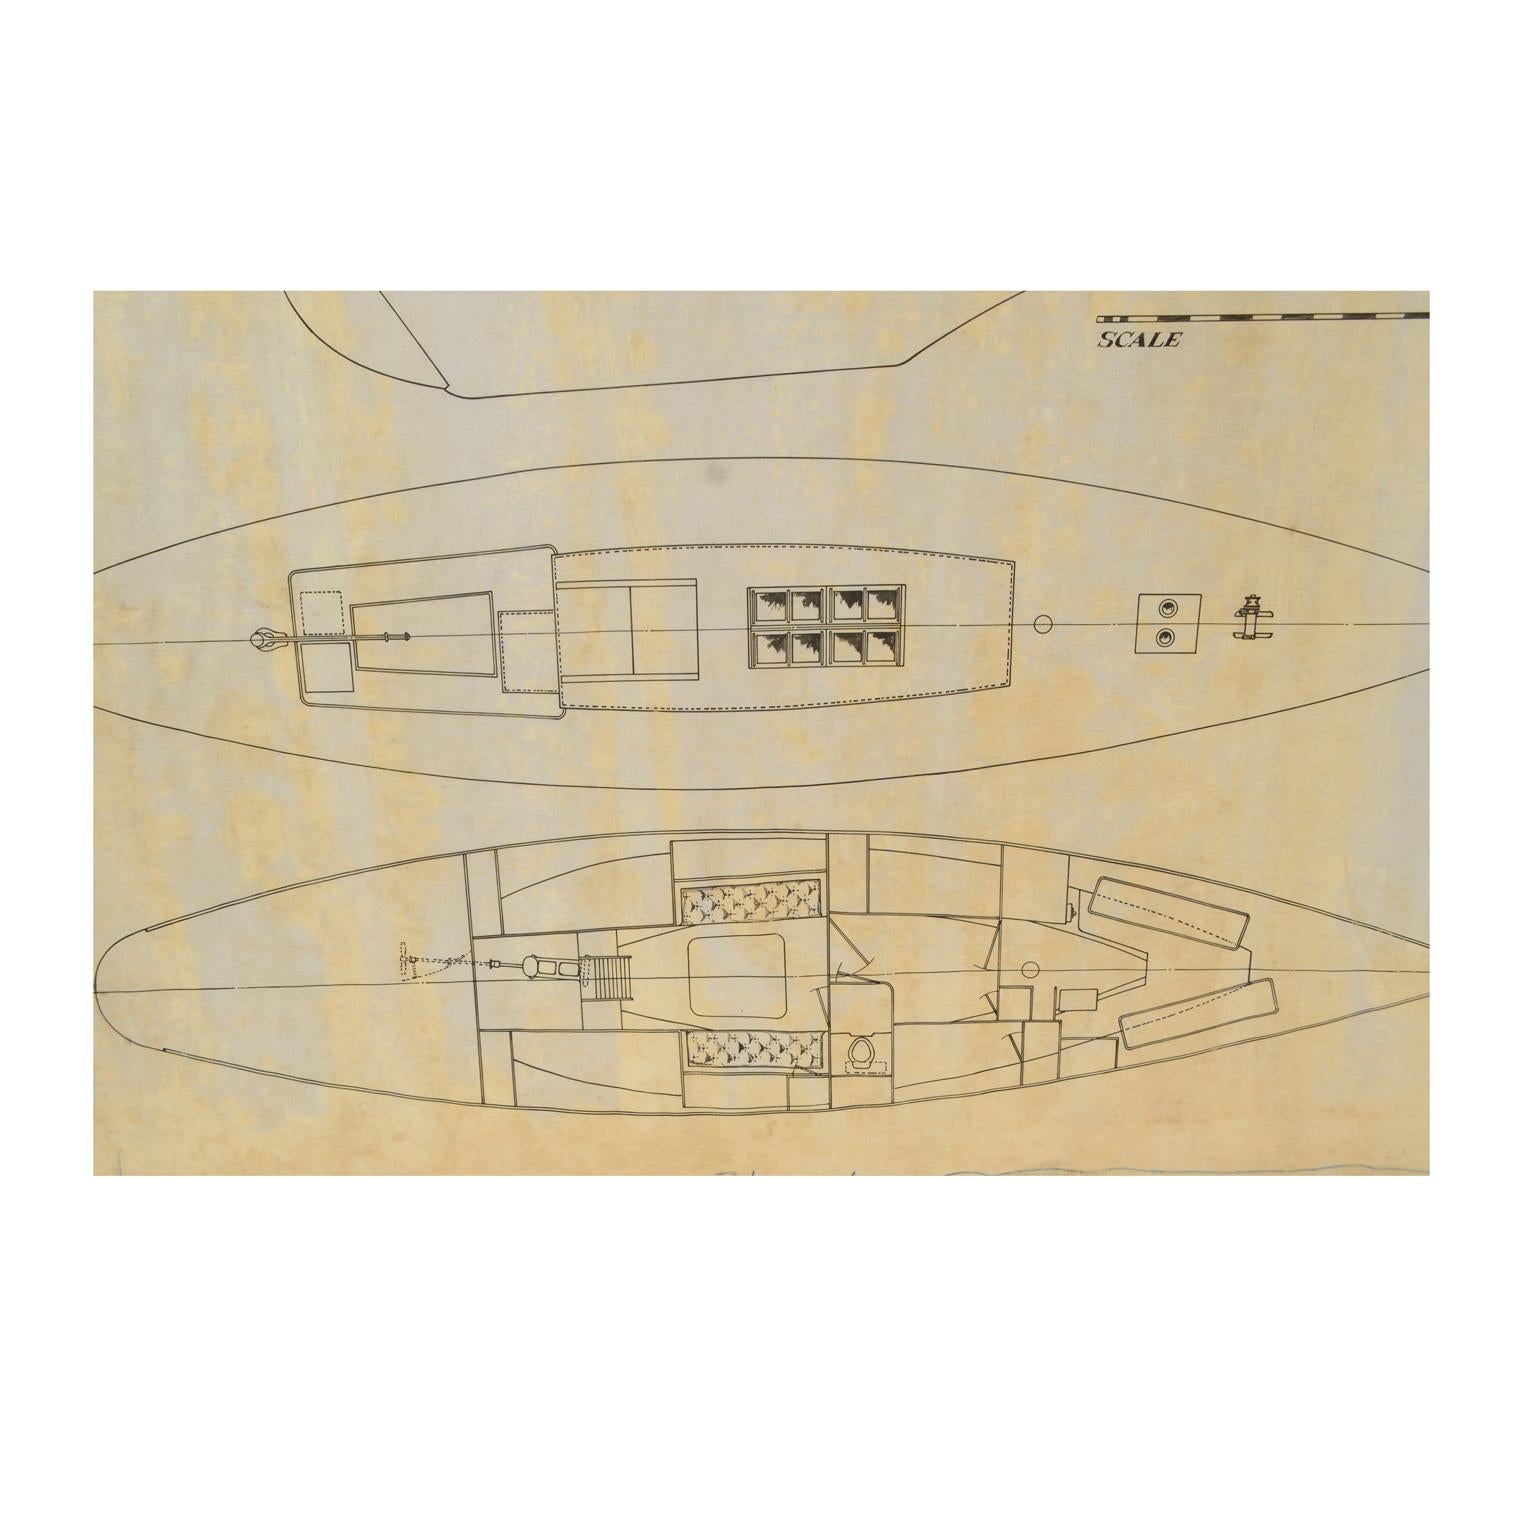 Paper Project of the Rosemary Sailing Boat by William Fife III archives of Uffa Fox